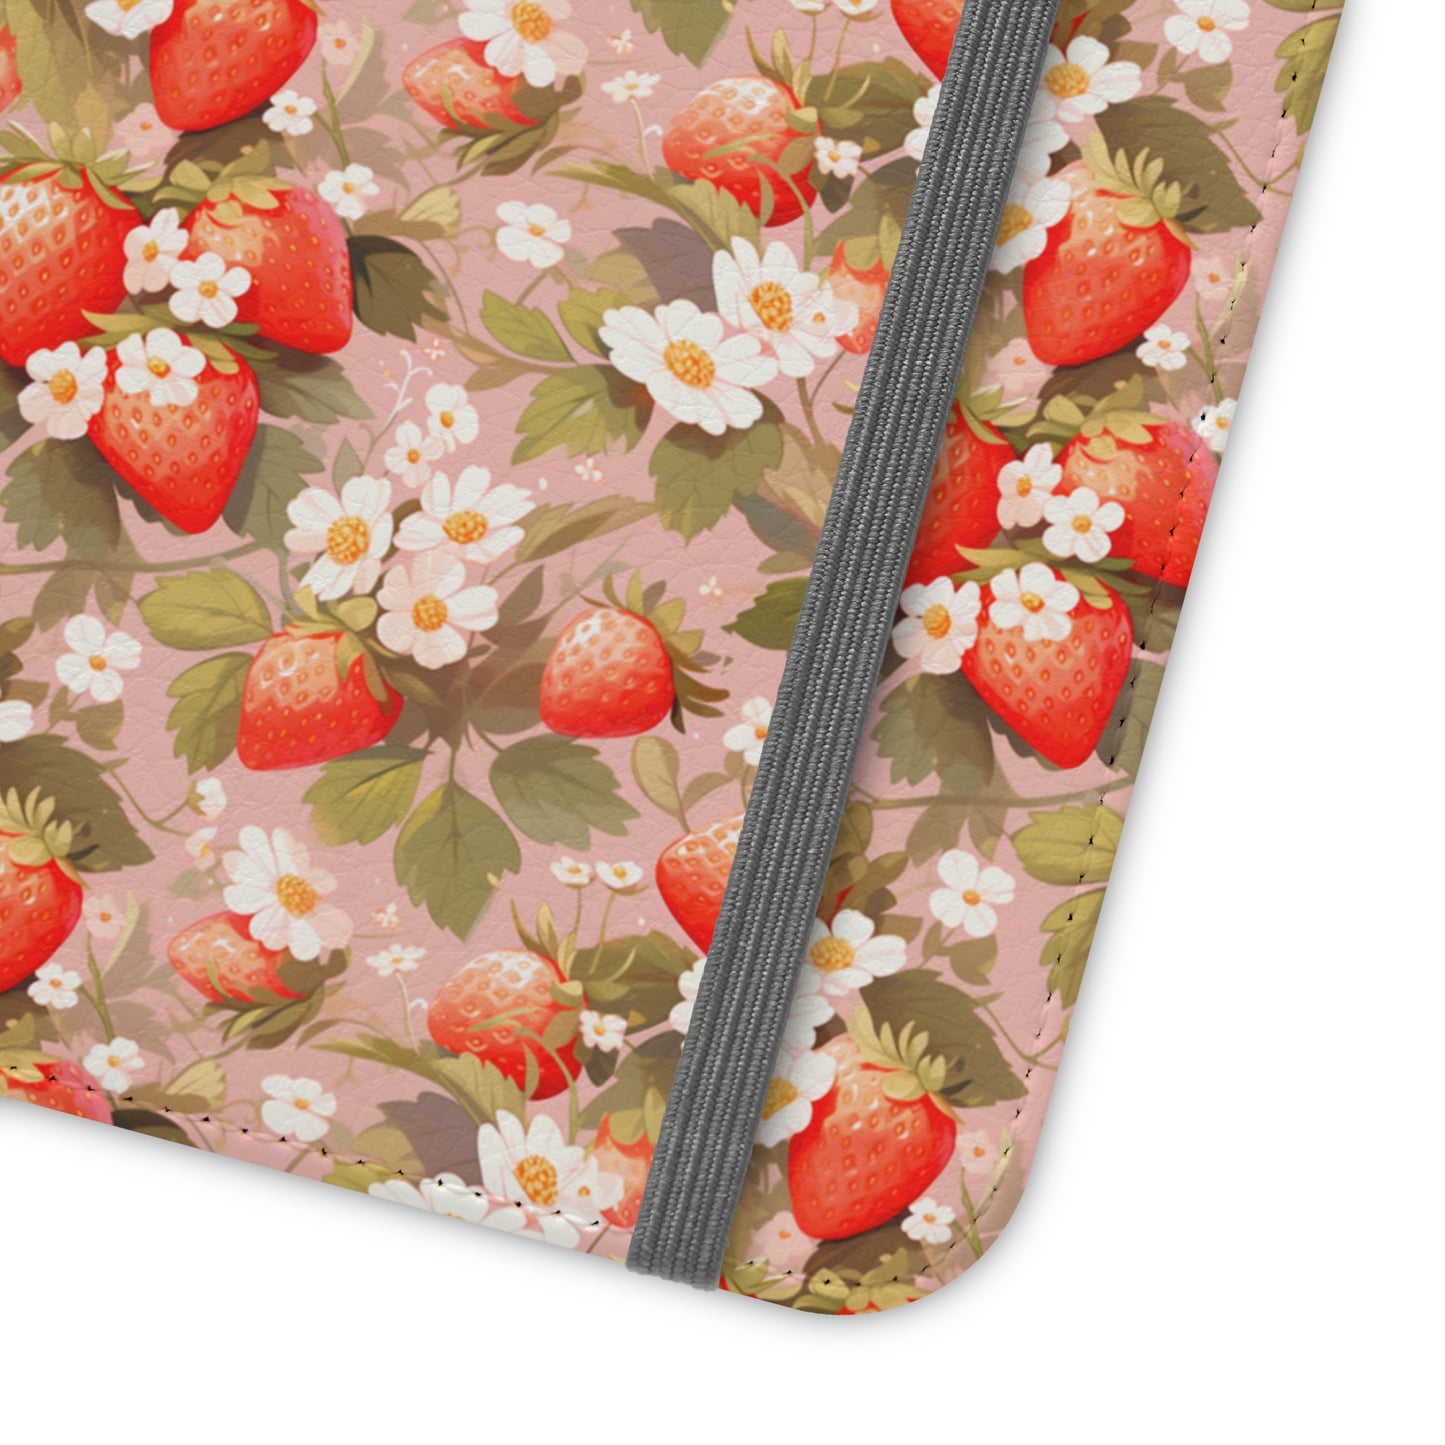 Symphony of Strawberries | Wallet Phone Case